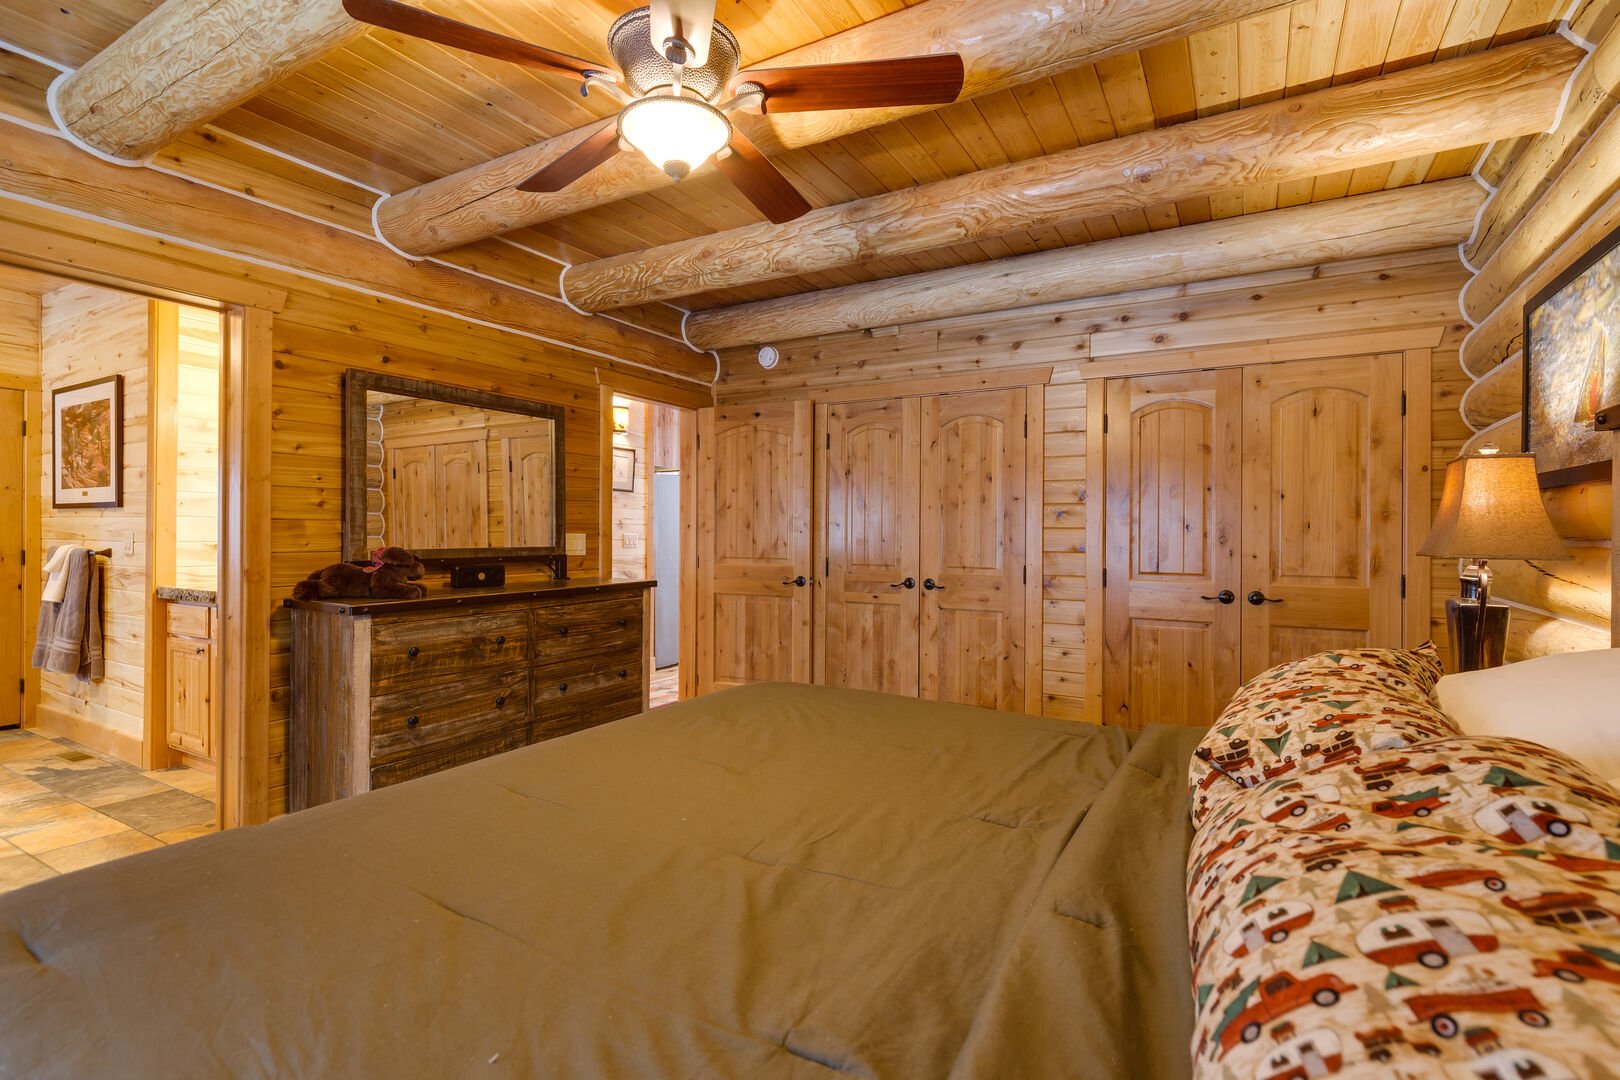 Lumberjack Lodge ~ bedroom #1 on main level w/ king bed and private ensuite bathroom